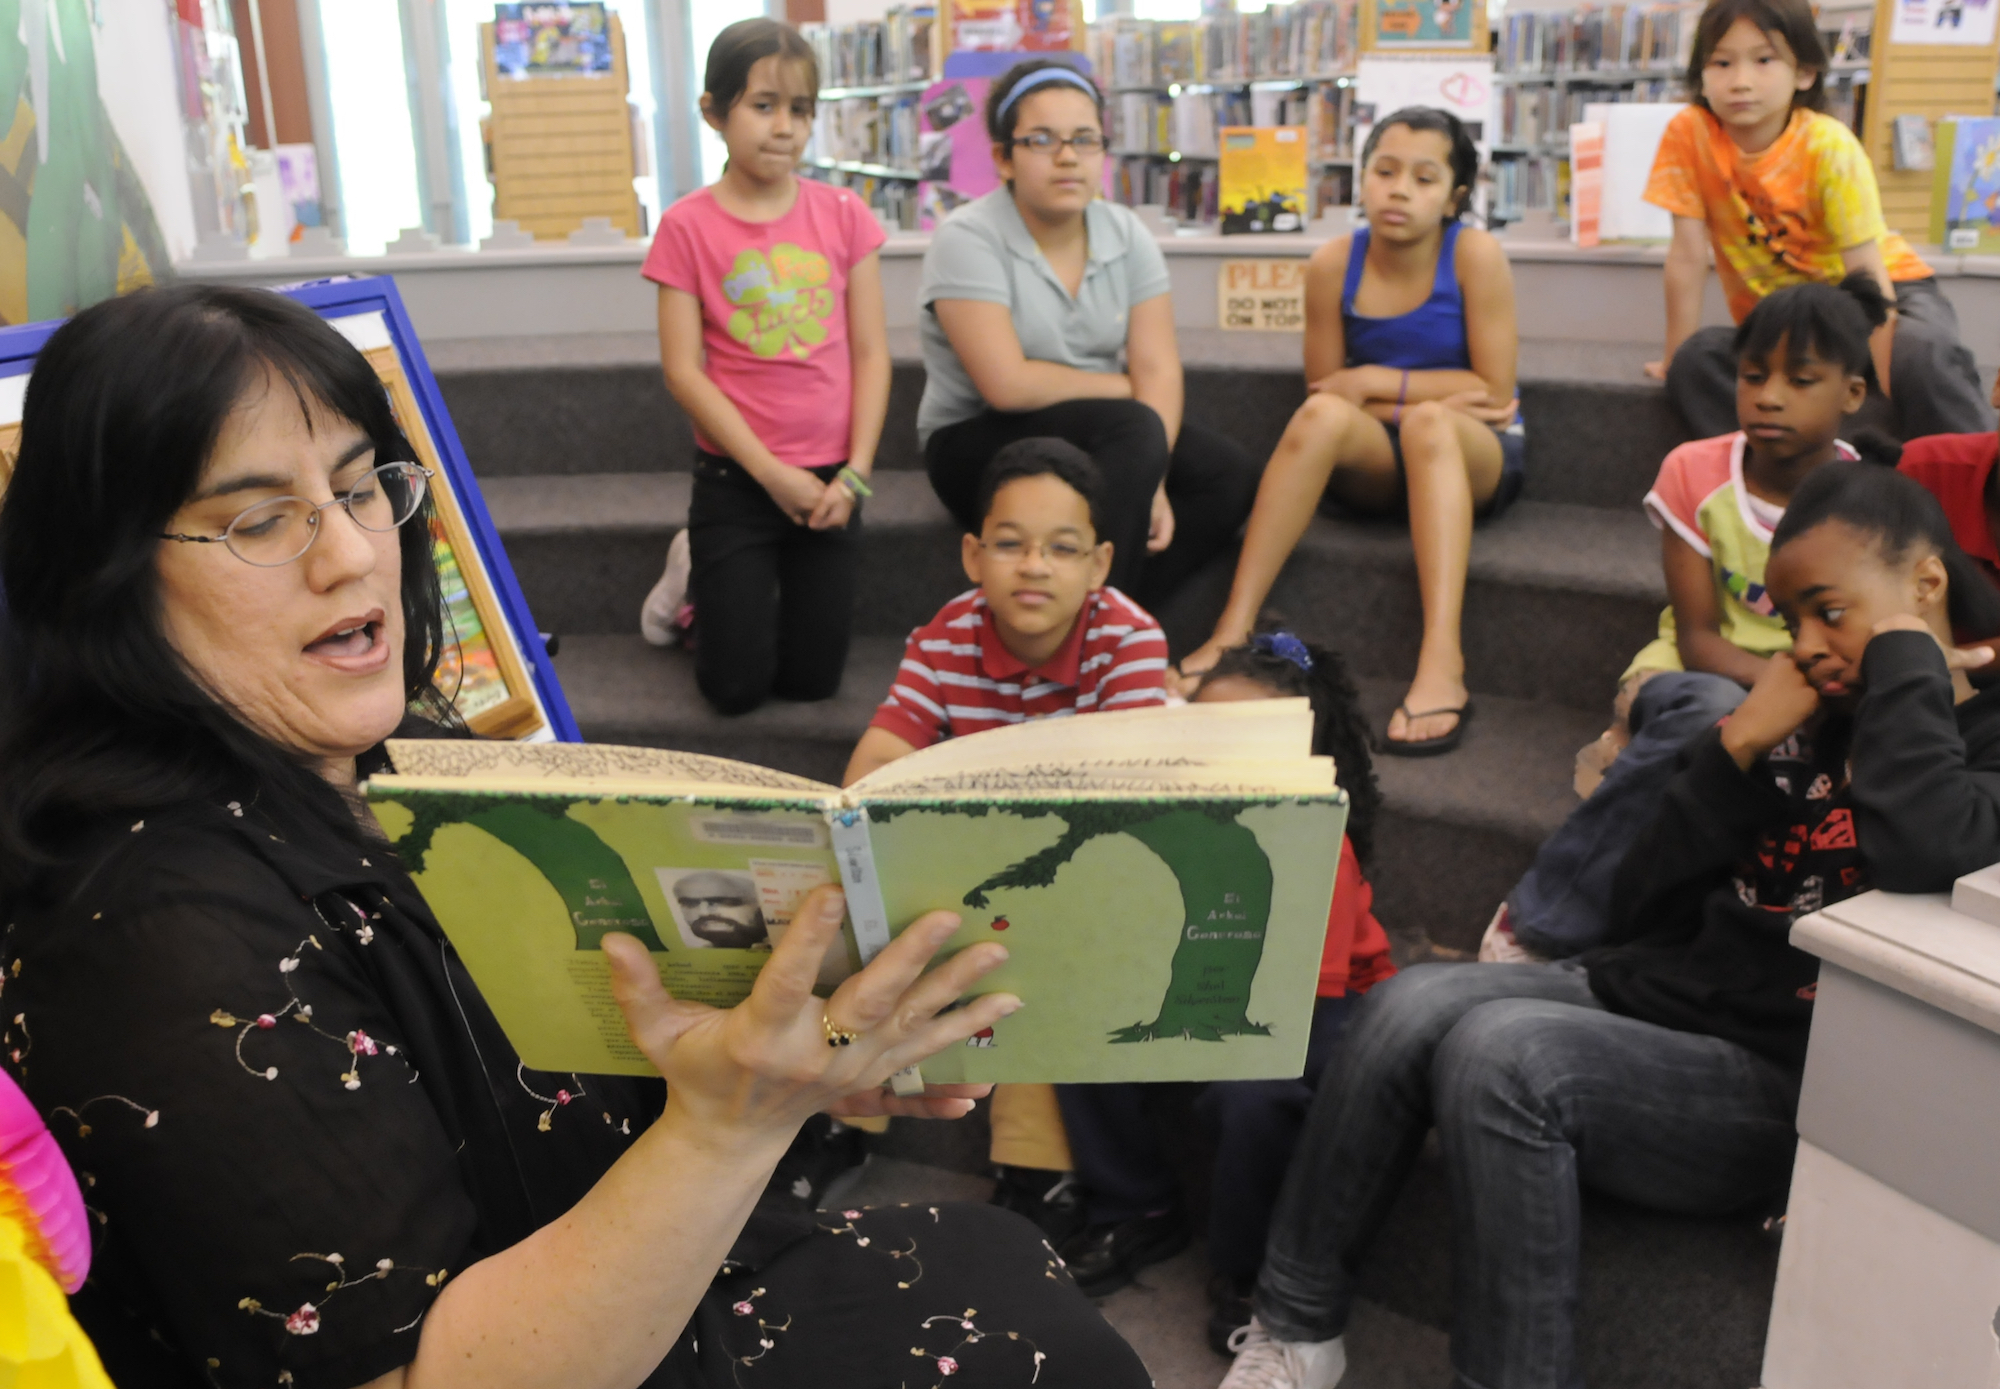 a woman with glasses holds open a copy of the giving tree with a green cover. Kids sit on risers in the background looking at the book